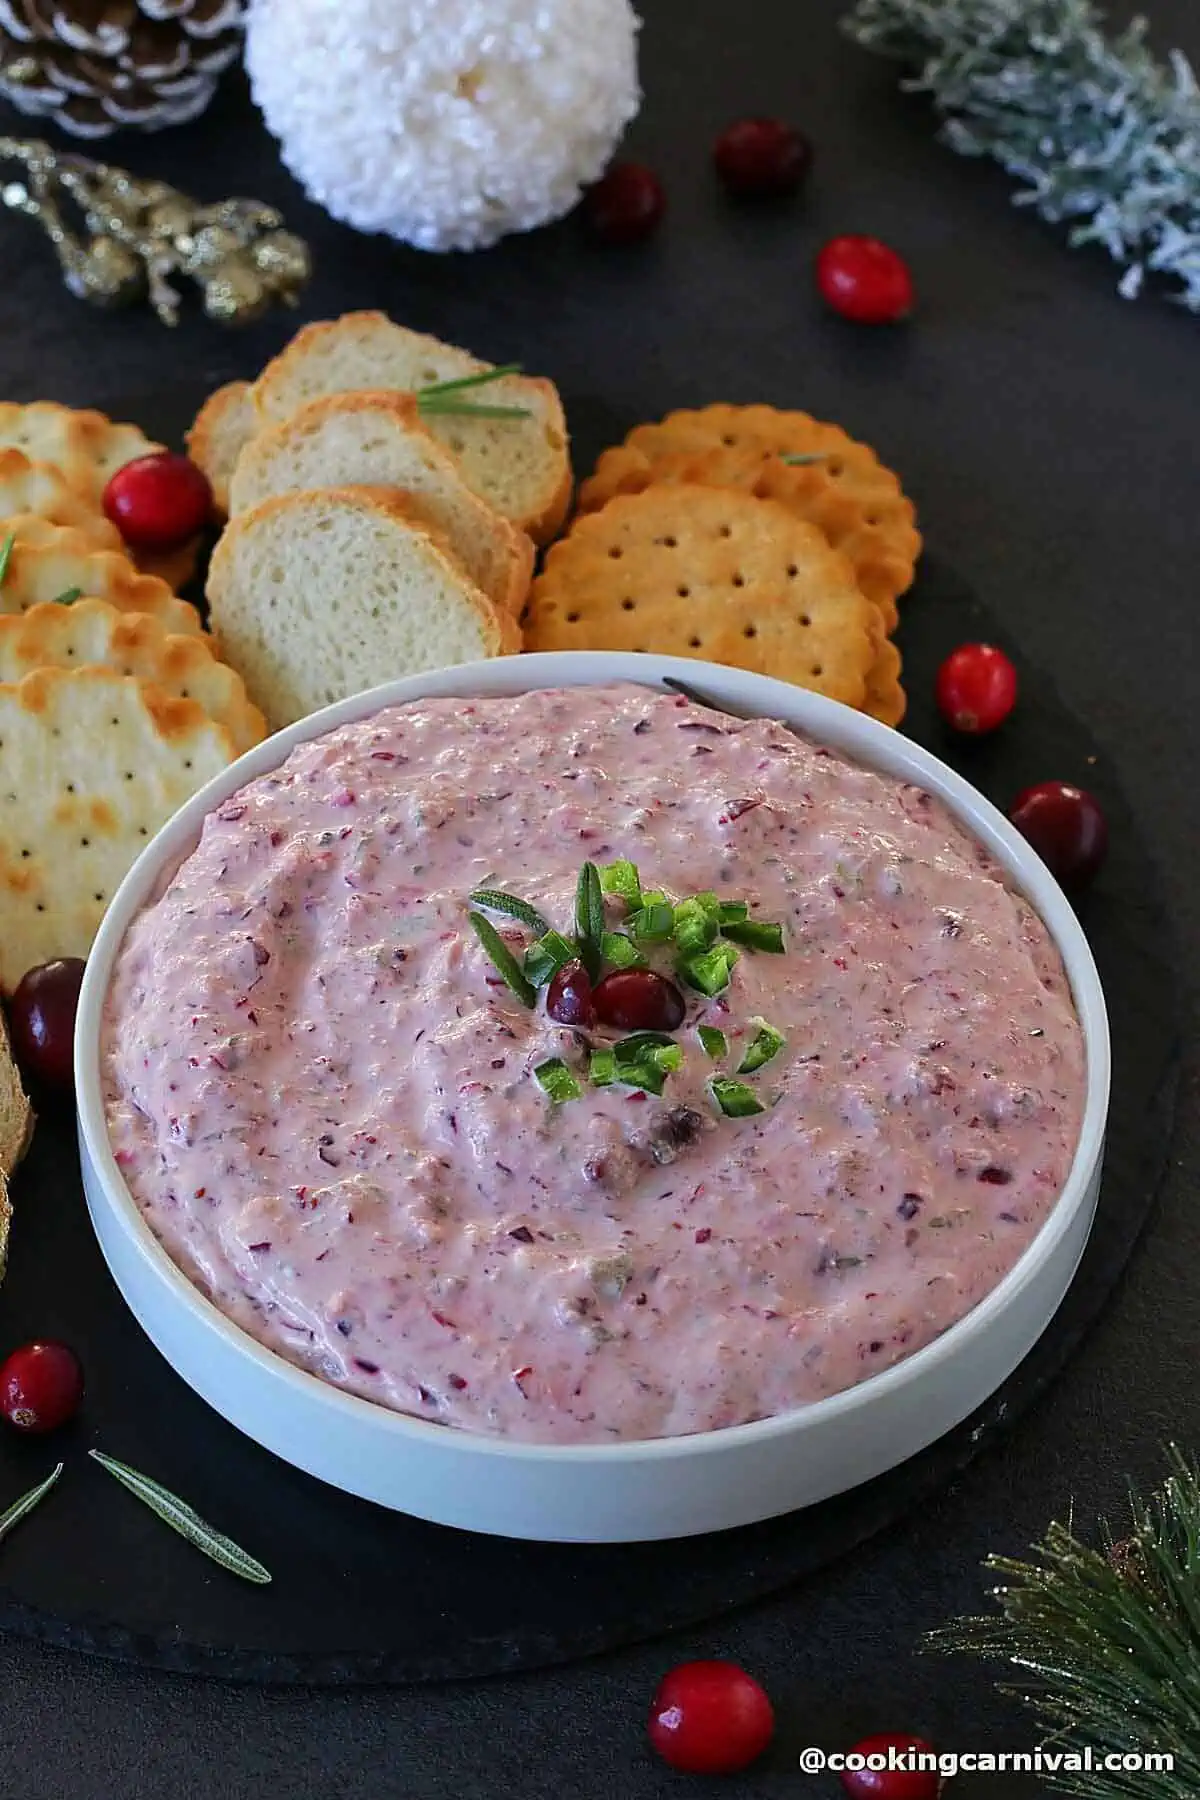 Cranberry jalapeno dip is served in a white dipping bowl with crackers and crostini.